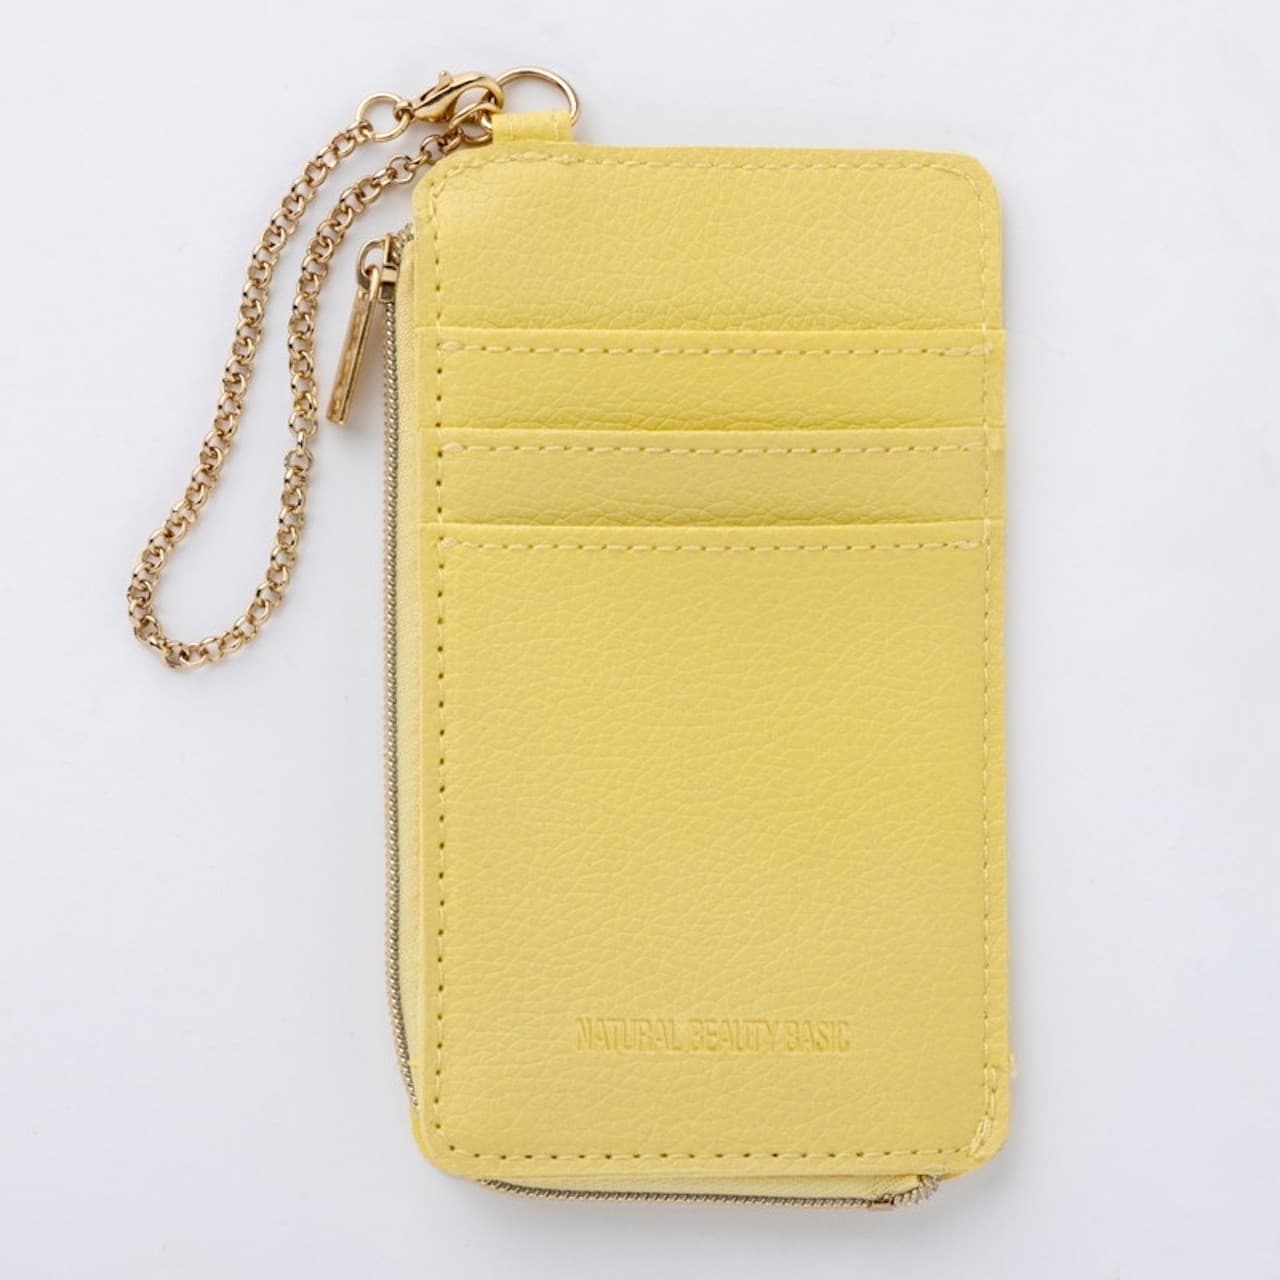 NATURAL BEAUTY BASIC Smartphone shoulder book with removable card case that opens easily